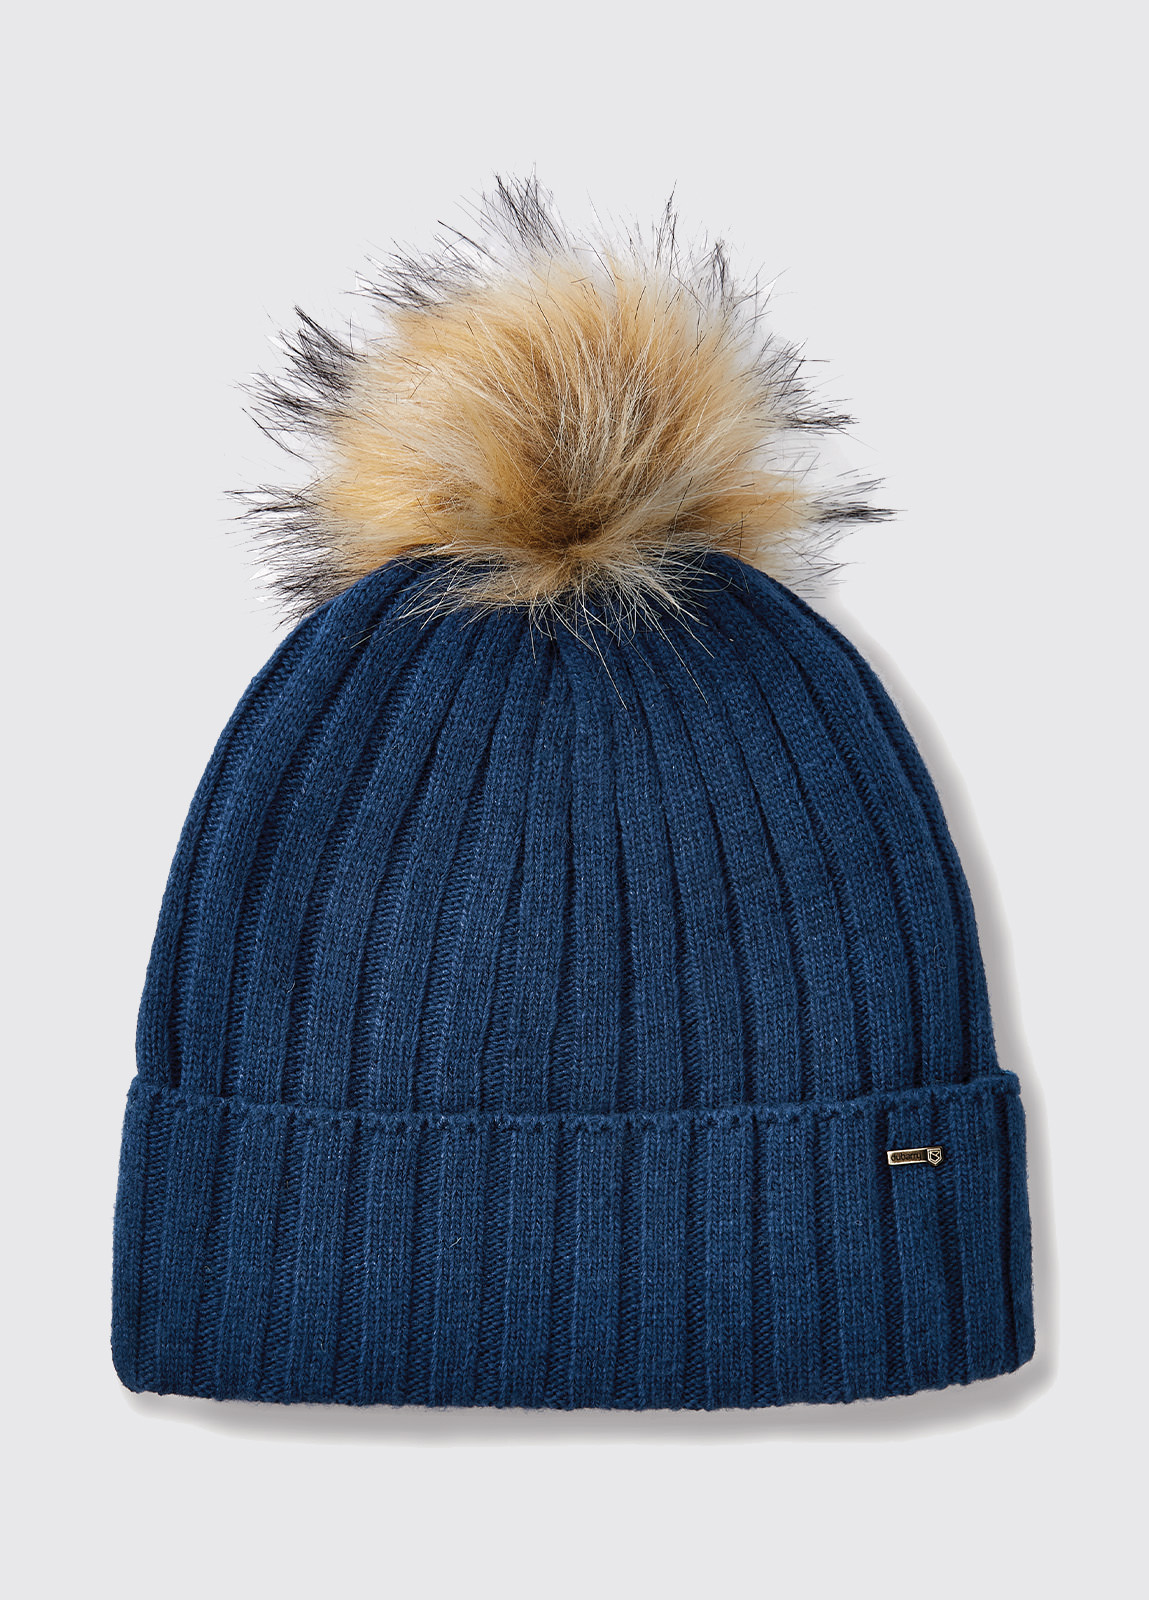 Curlew Knitted Hat with bobble - Peacock Blue